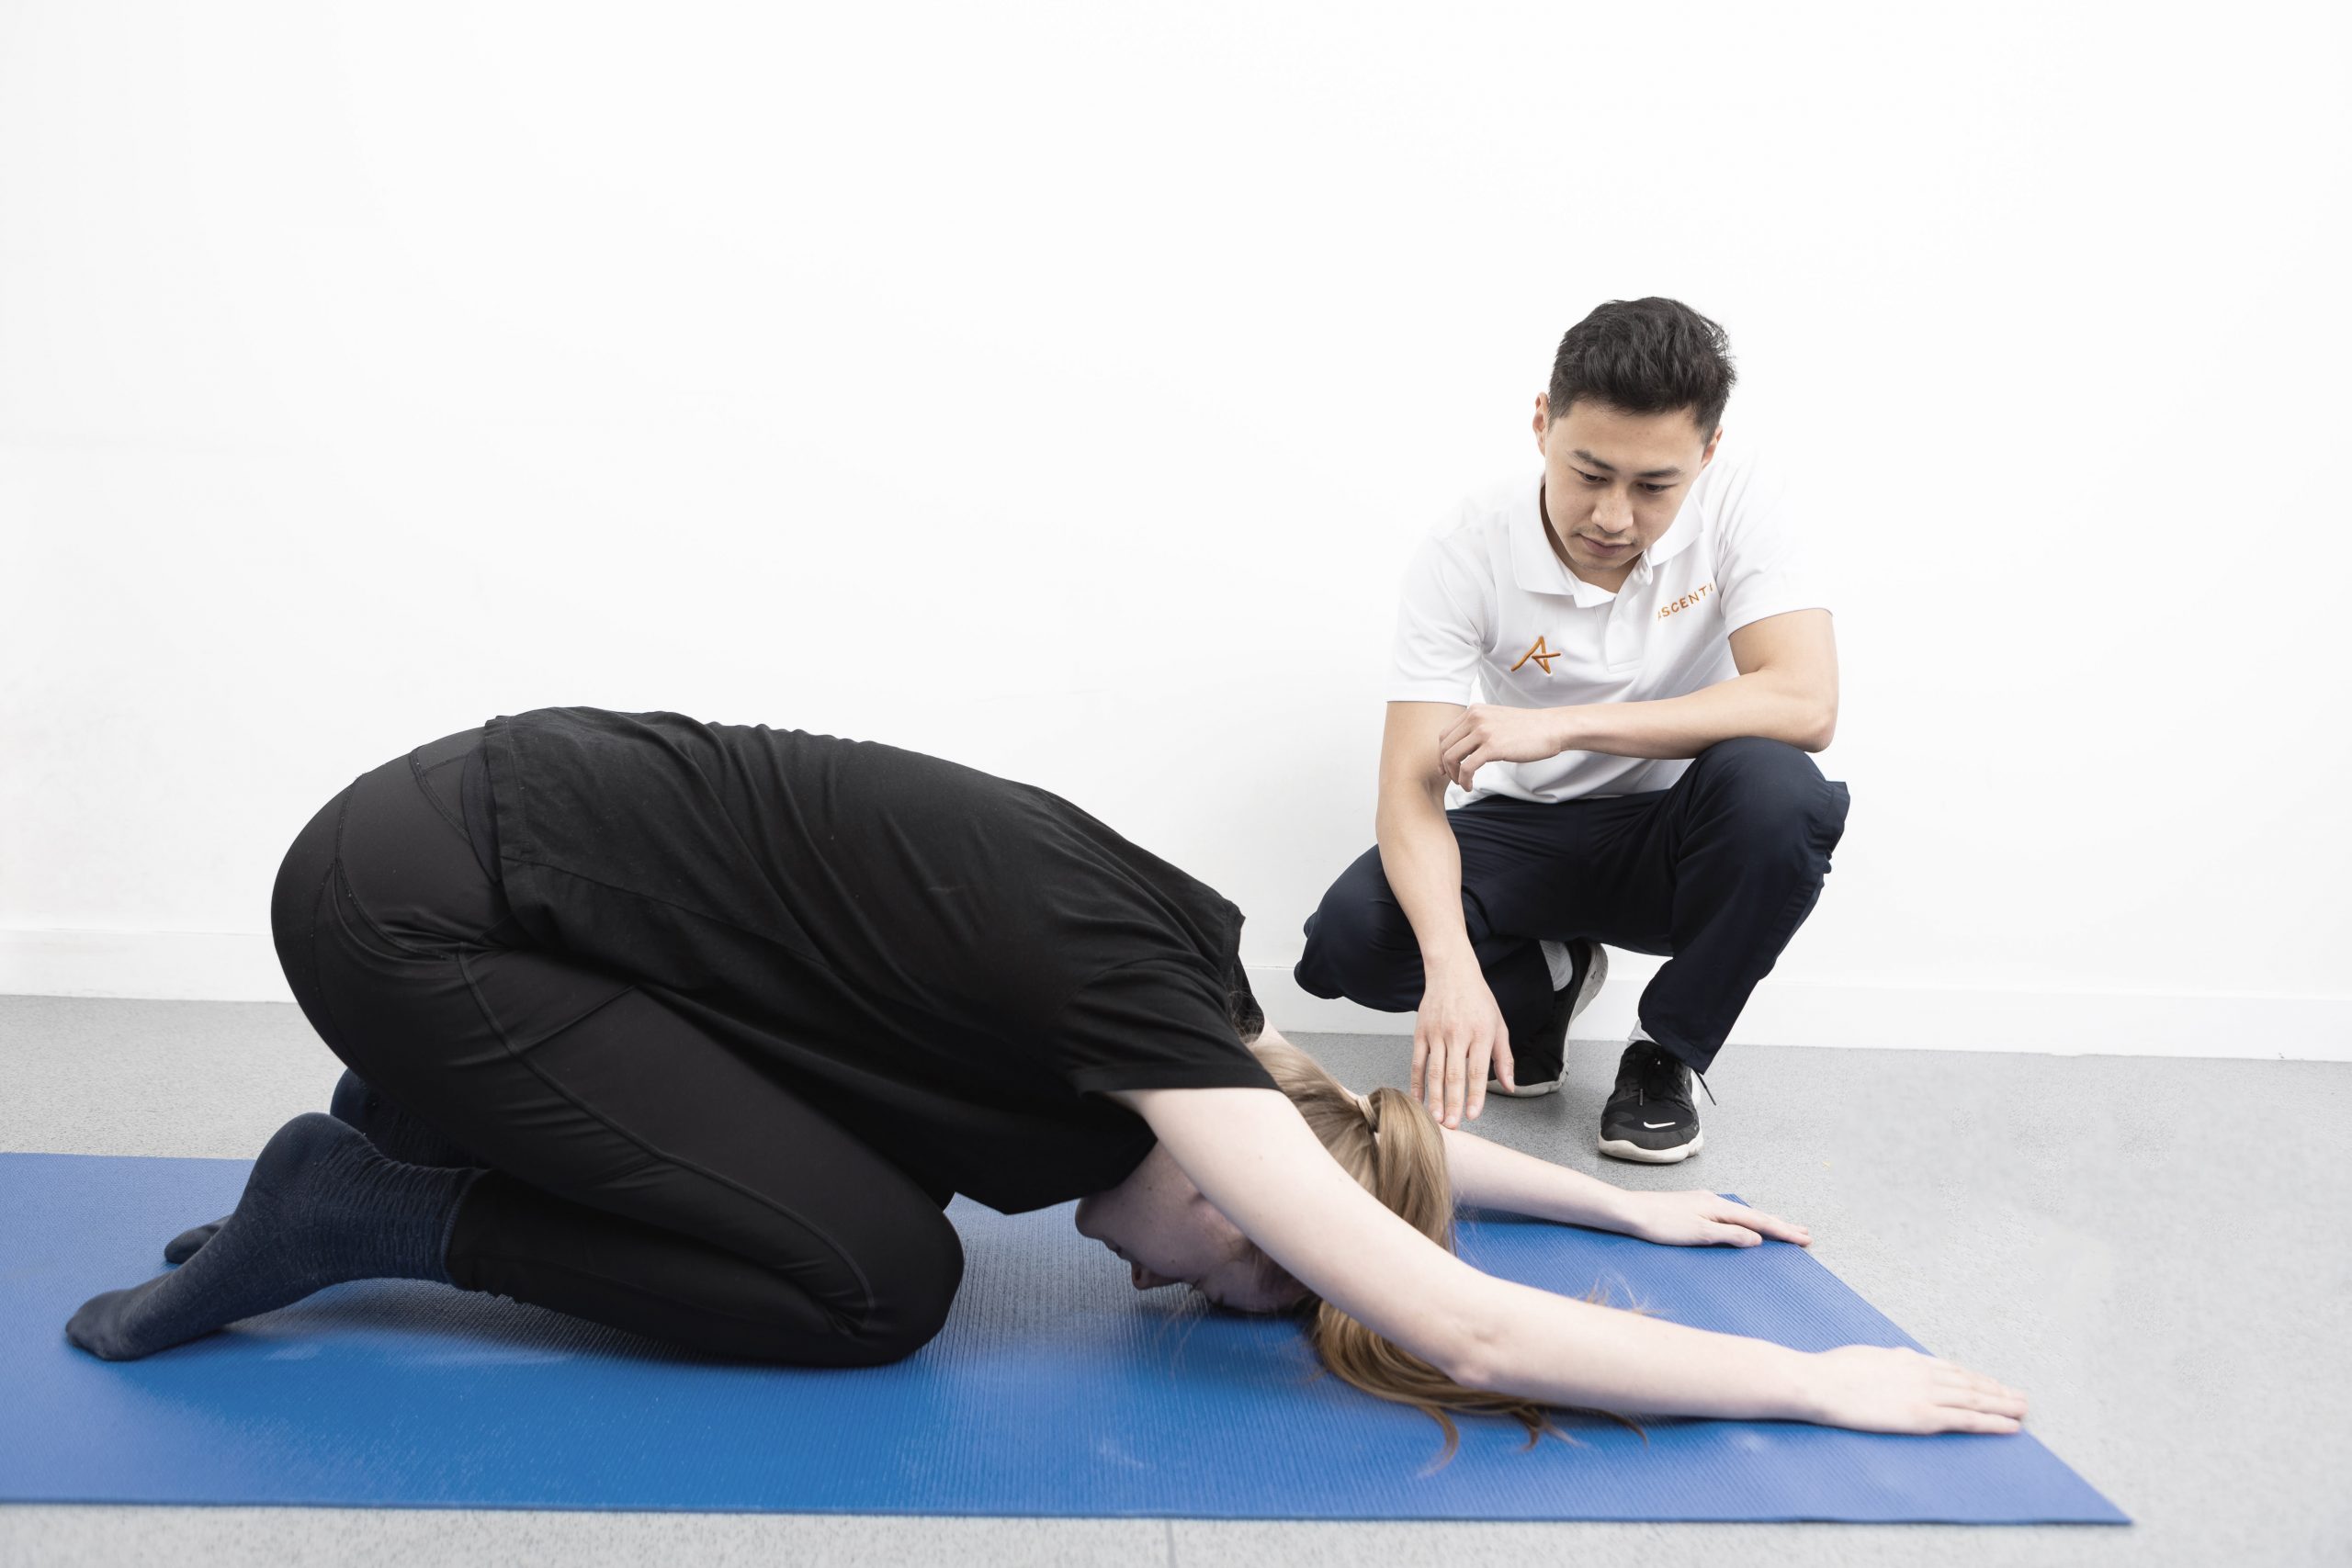 A male physiotherapist dressed in Ascenti uniform (black trousers and white polo shirt) is treating a patient. The patient is dressed all in black, is adopting a stretch pose on a floor mat, her face is not visible.